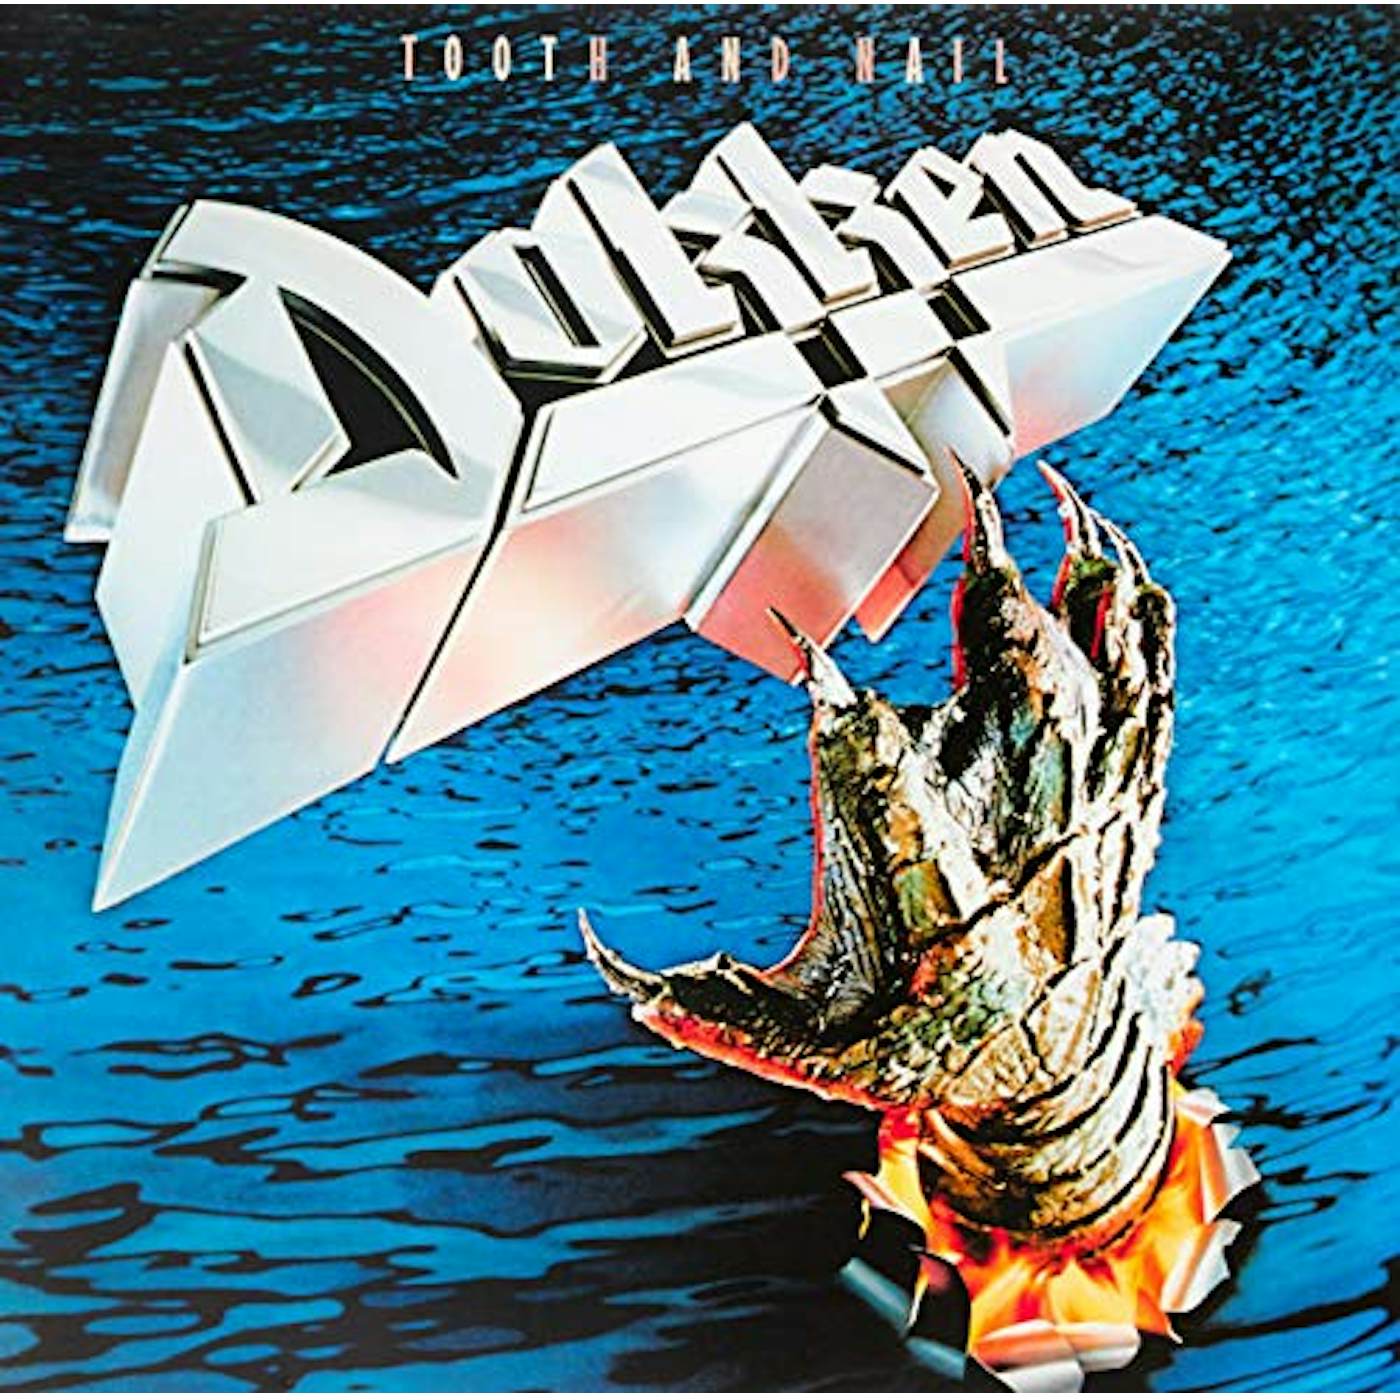 Dokken Tooth And Nail Vinyl Record